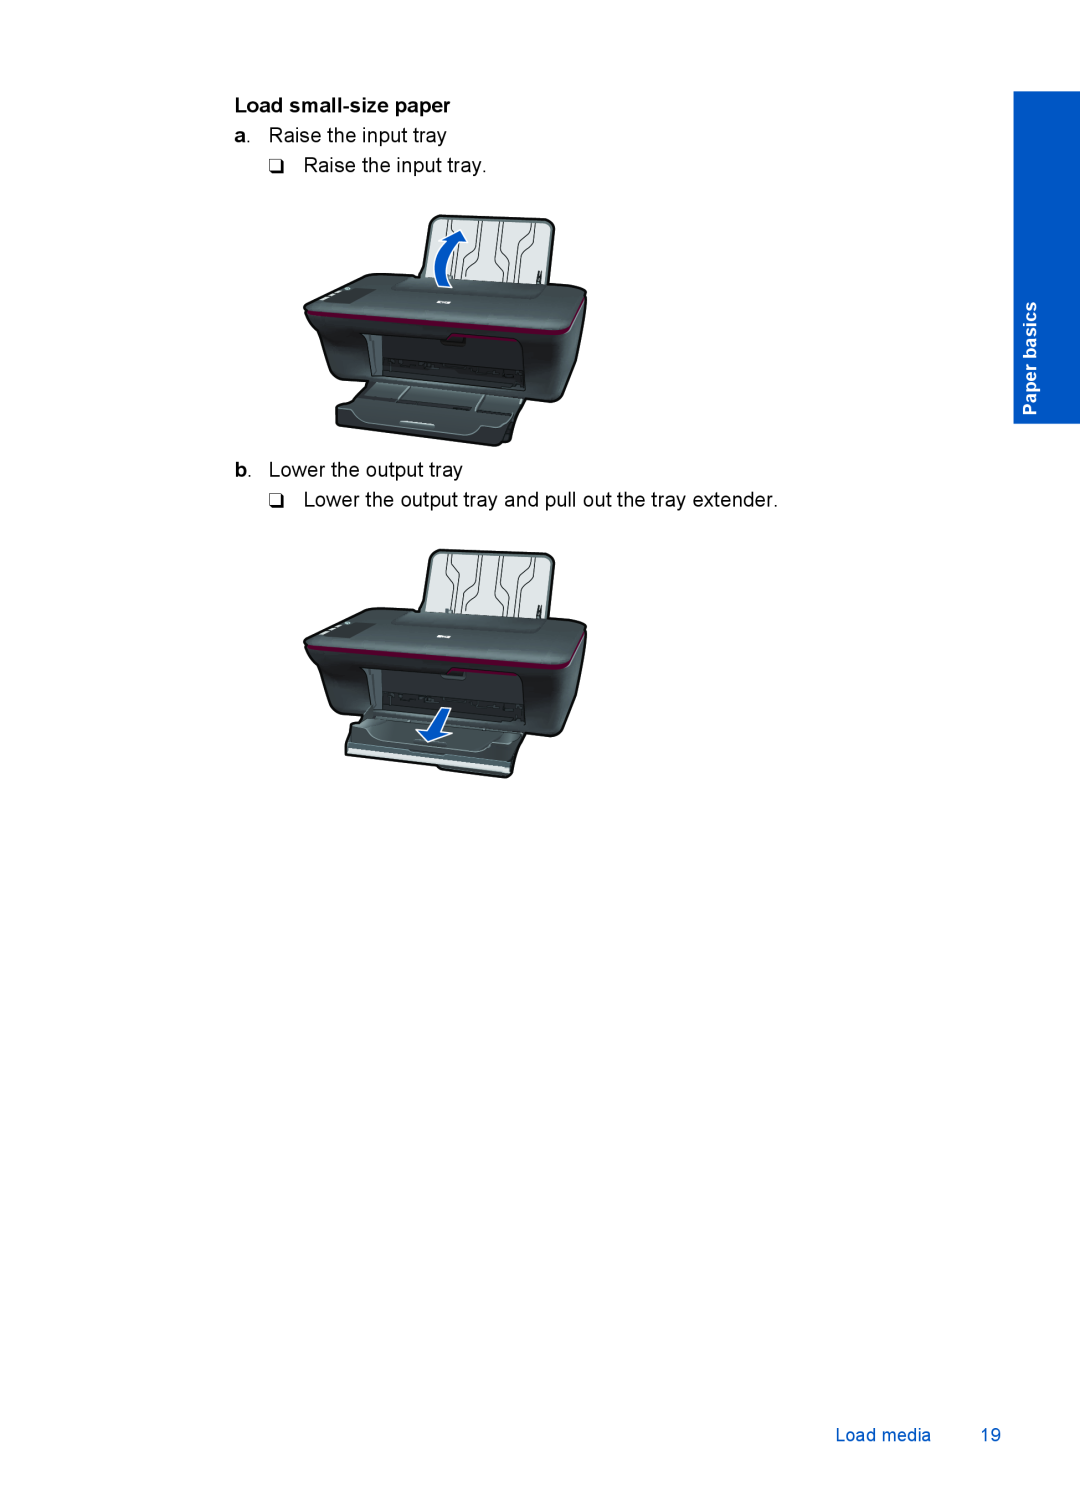 HP 1050 - J410a Load small-size paper, a. Raise the input tray Raise the input tray, b. Lower the output tray, Load media 